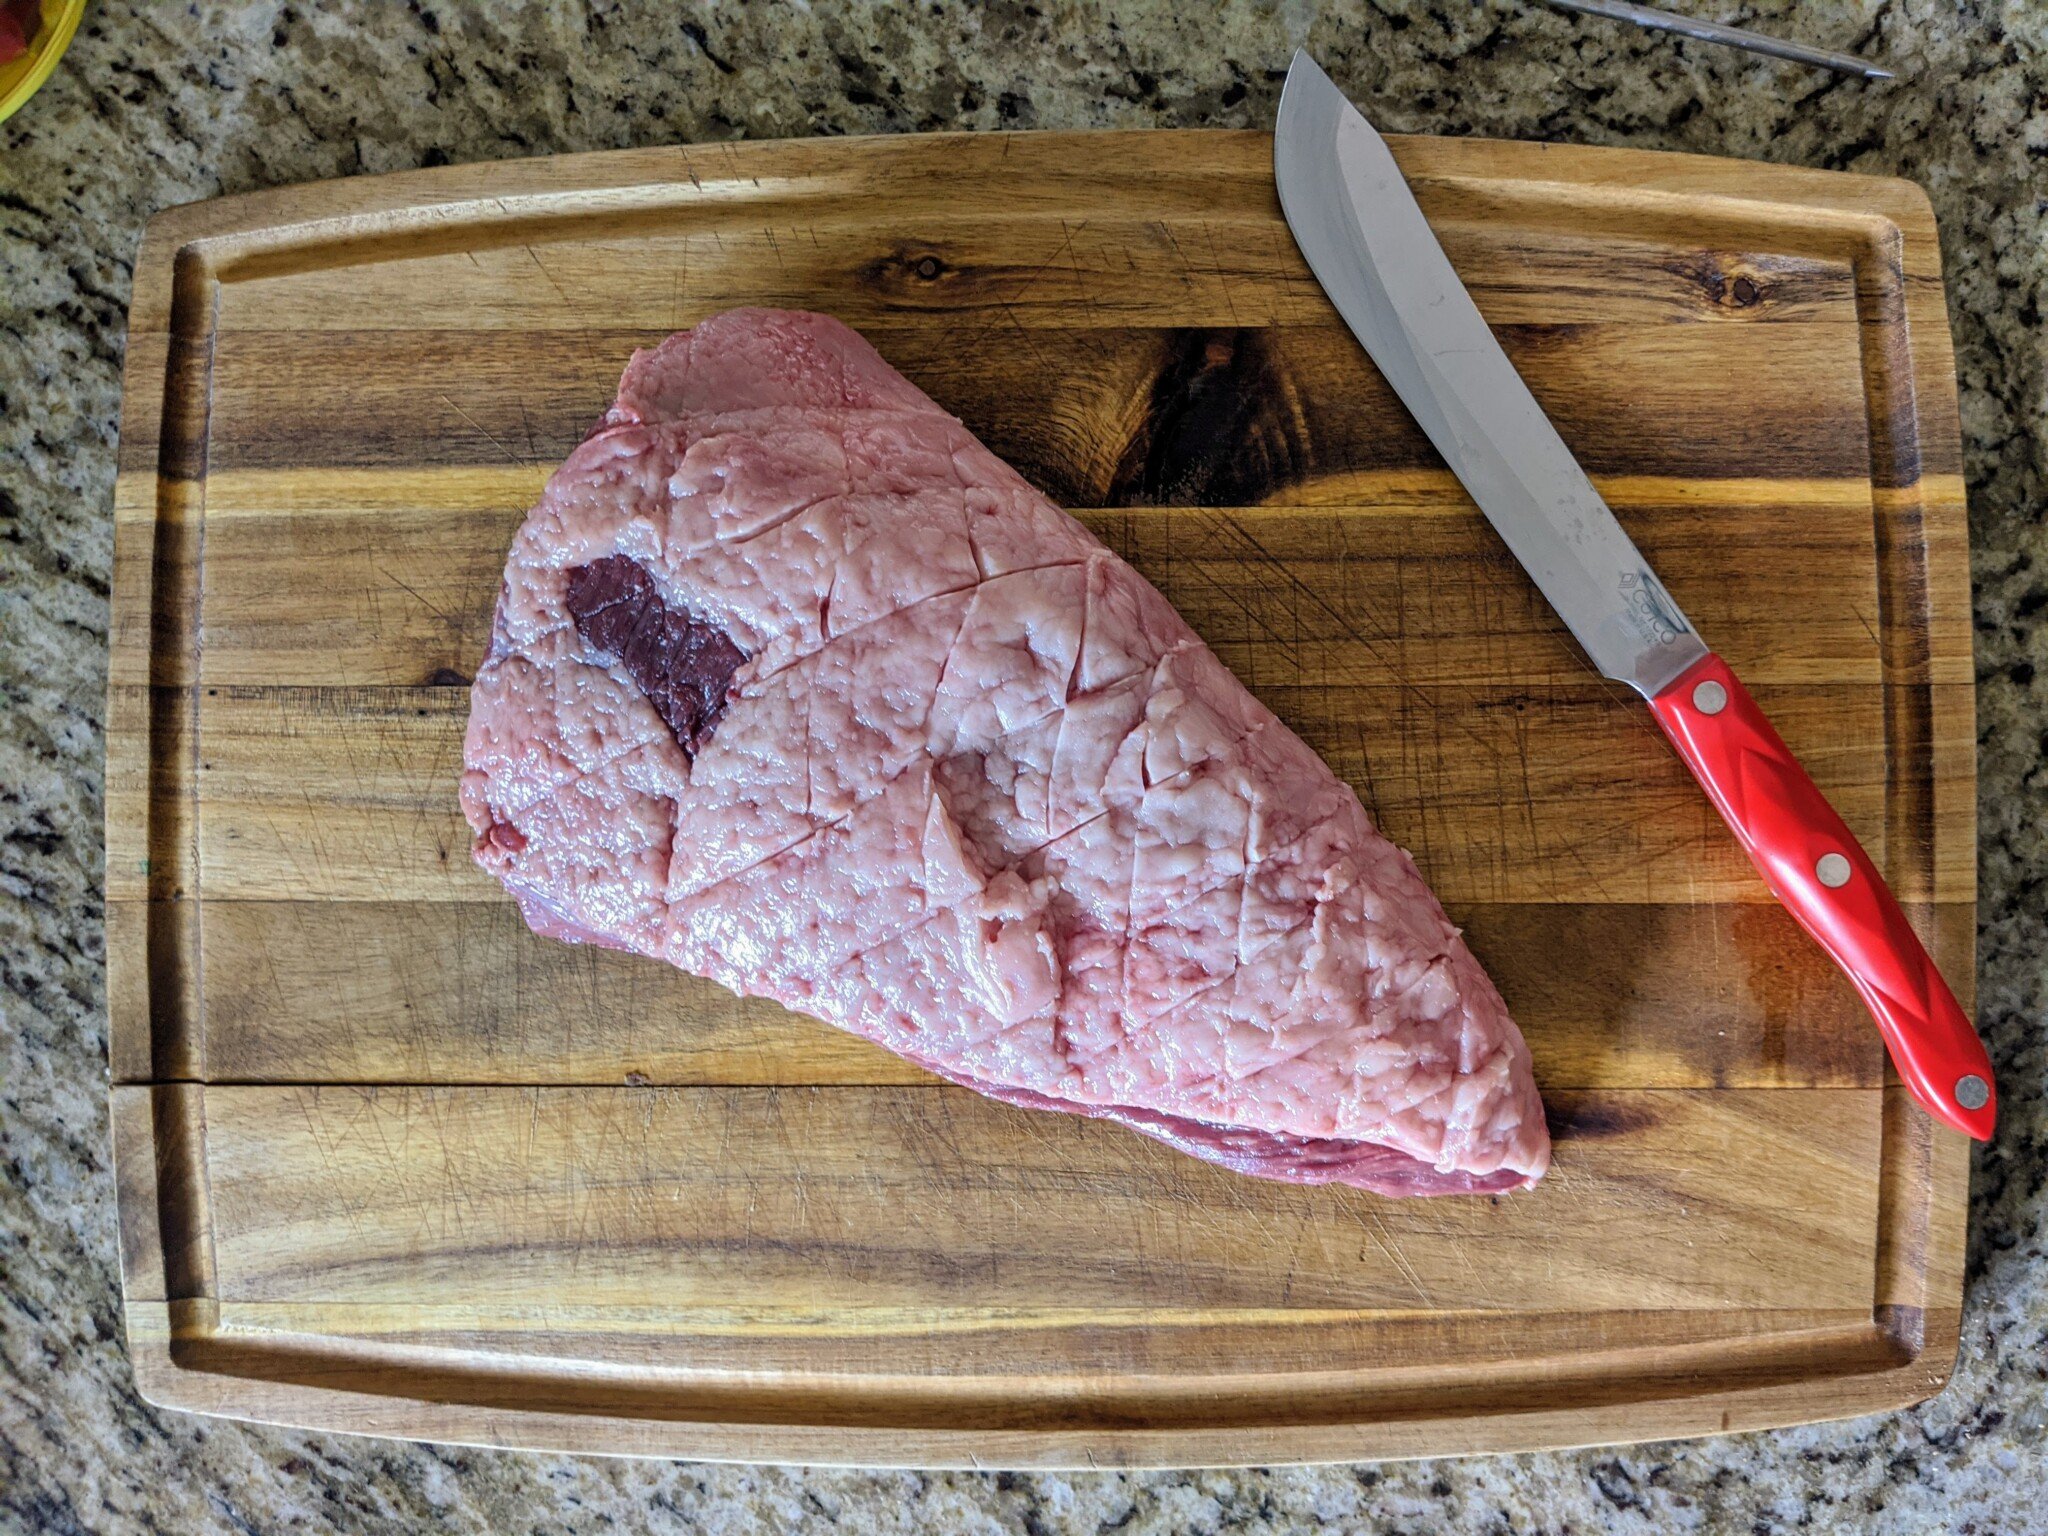 Showing the top sirloin, aka coulotte or picanha. A triangular 3 to 5 pound cut with a fat cap covering top surface.